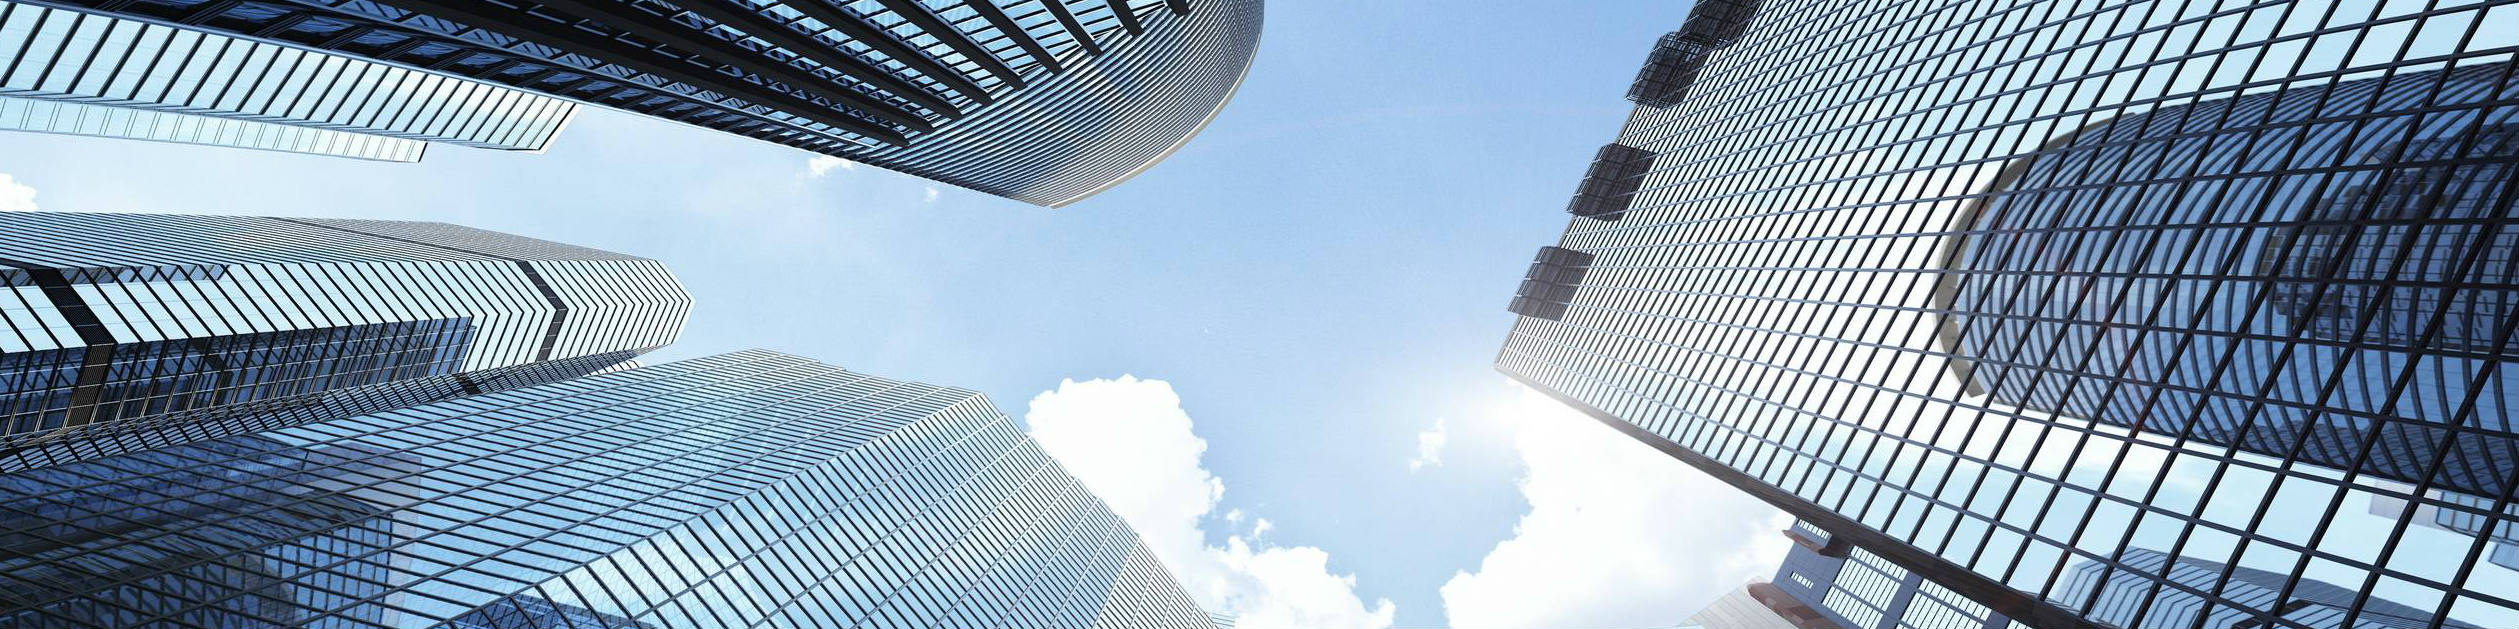 Skyscrapers - THIN BANNER